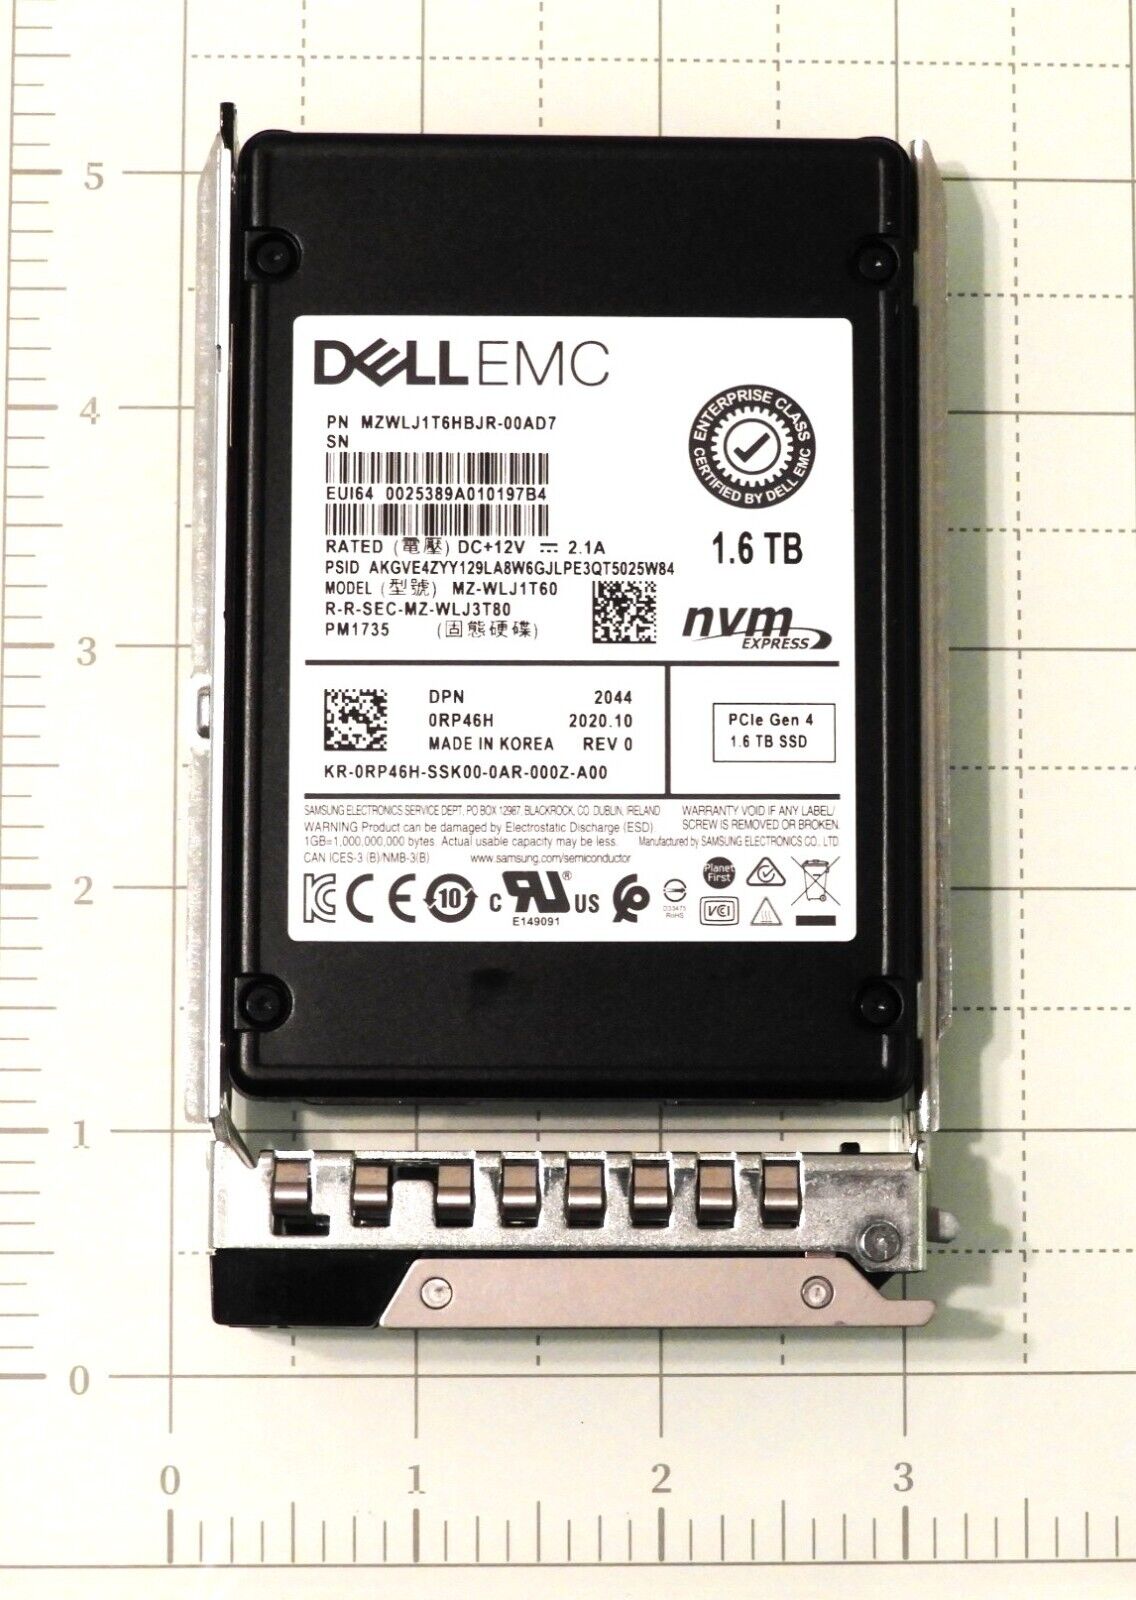 Samsung 1.6tb NVMe Solid State drive (SSD)